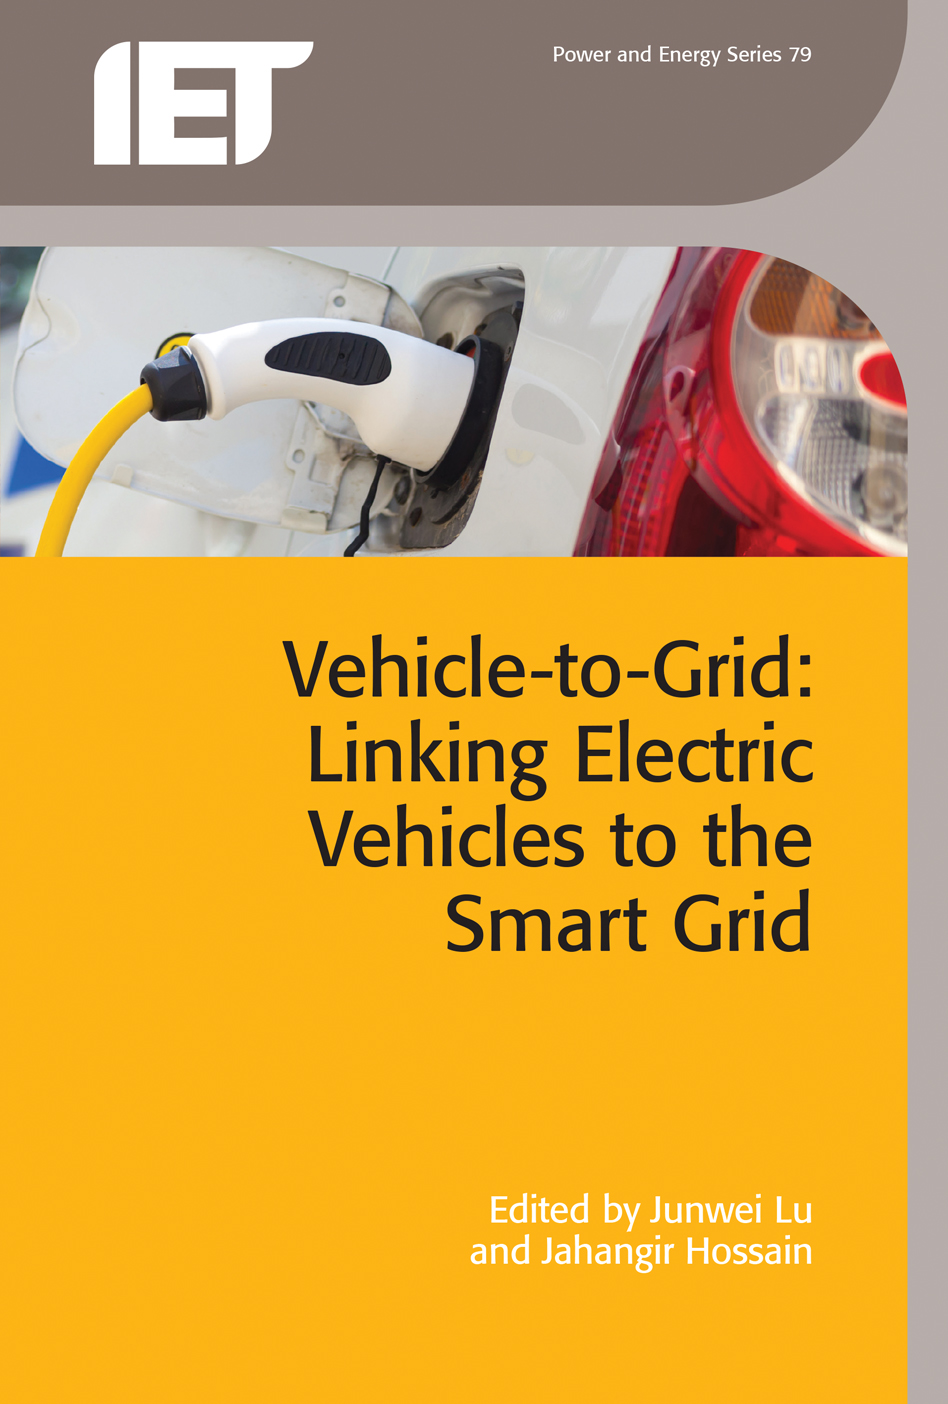 Vehicle-to-Grid, Linking electric vehicles to the smart grid